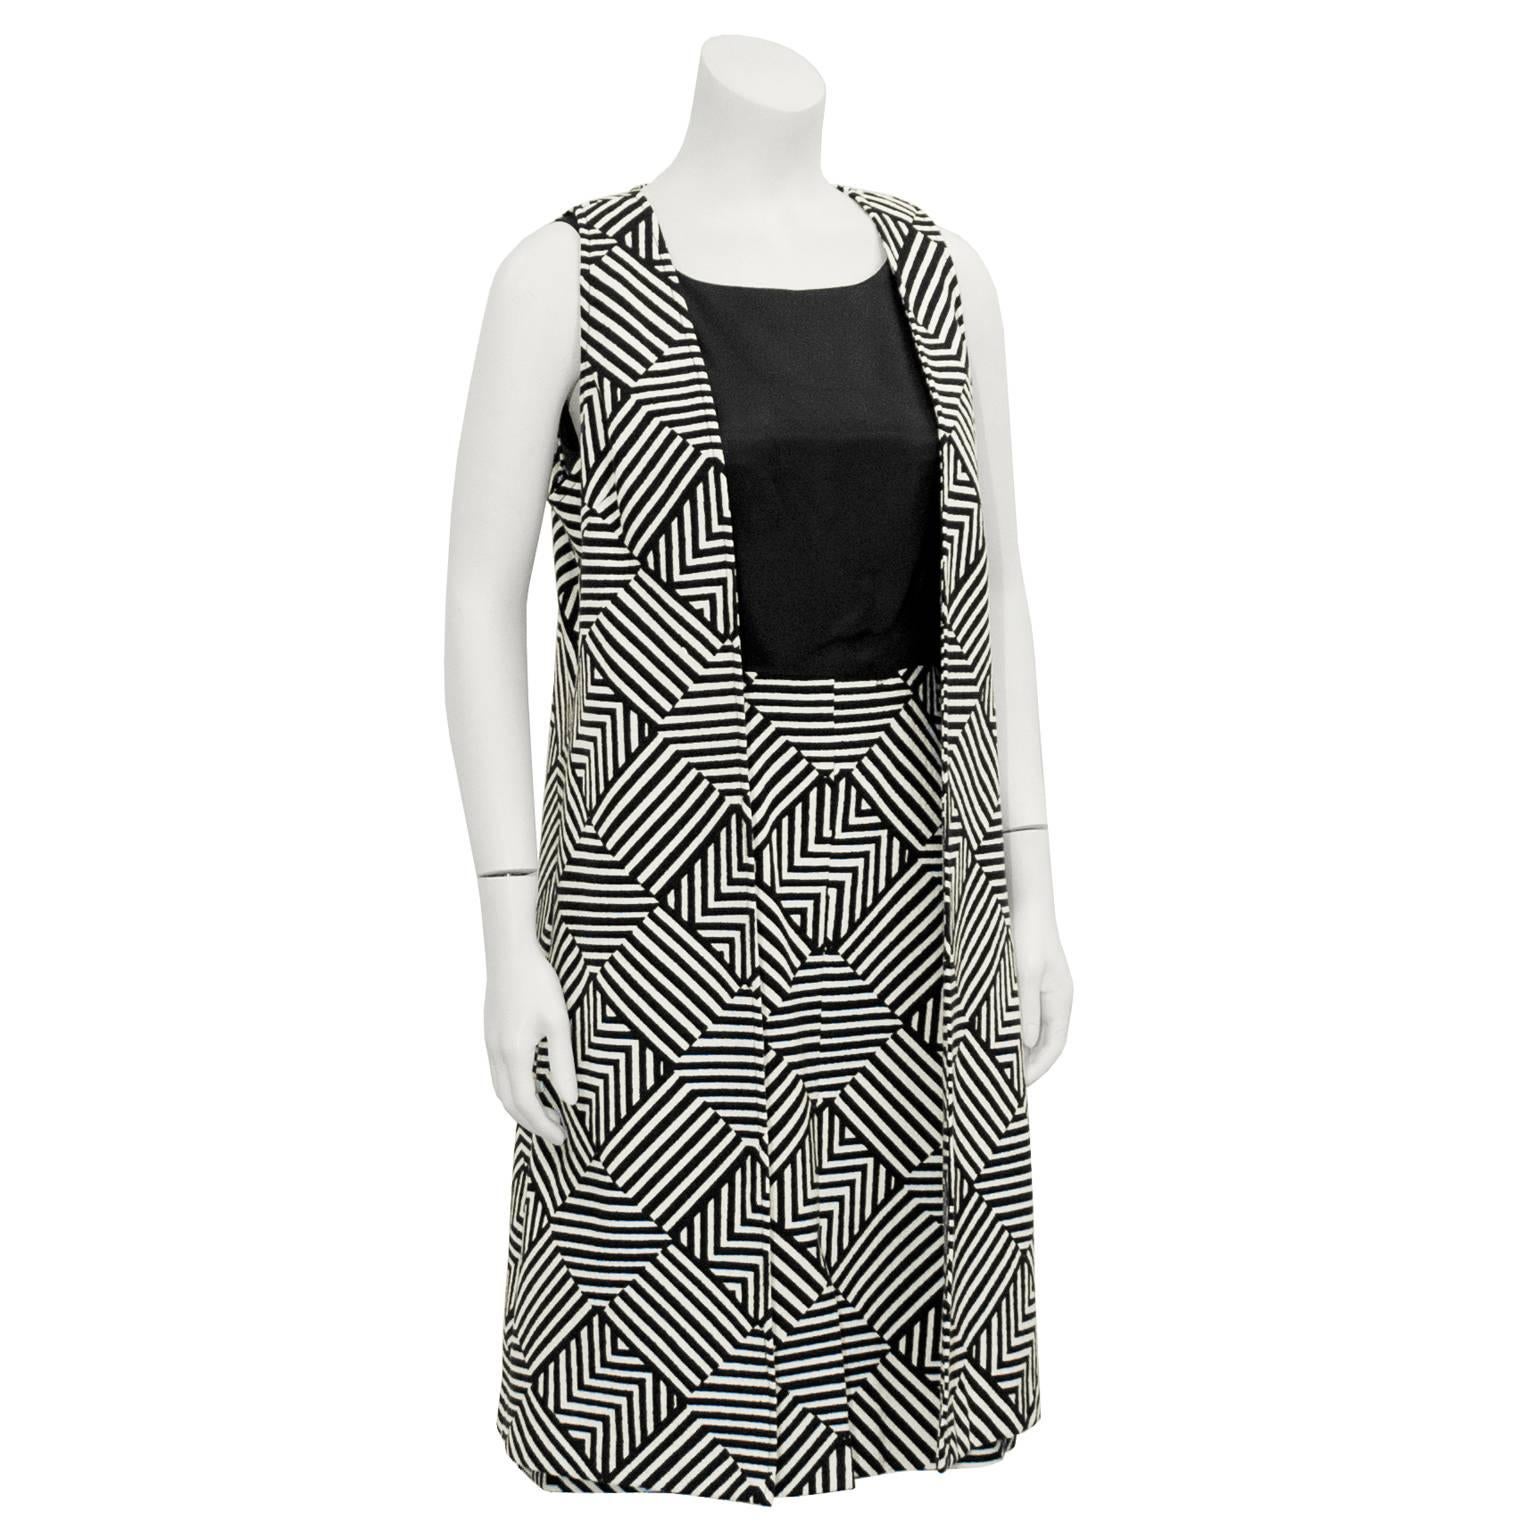 Eye-catching Mod geometric striped black and white dress and maxi vest from the 1960's. Simple sleeveless sheath dress with a squared neckline, black bodice, fitted waist, and bold softly quilted geometric pattern skirt. Vest is patterned all-over